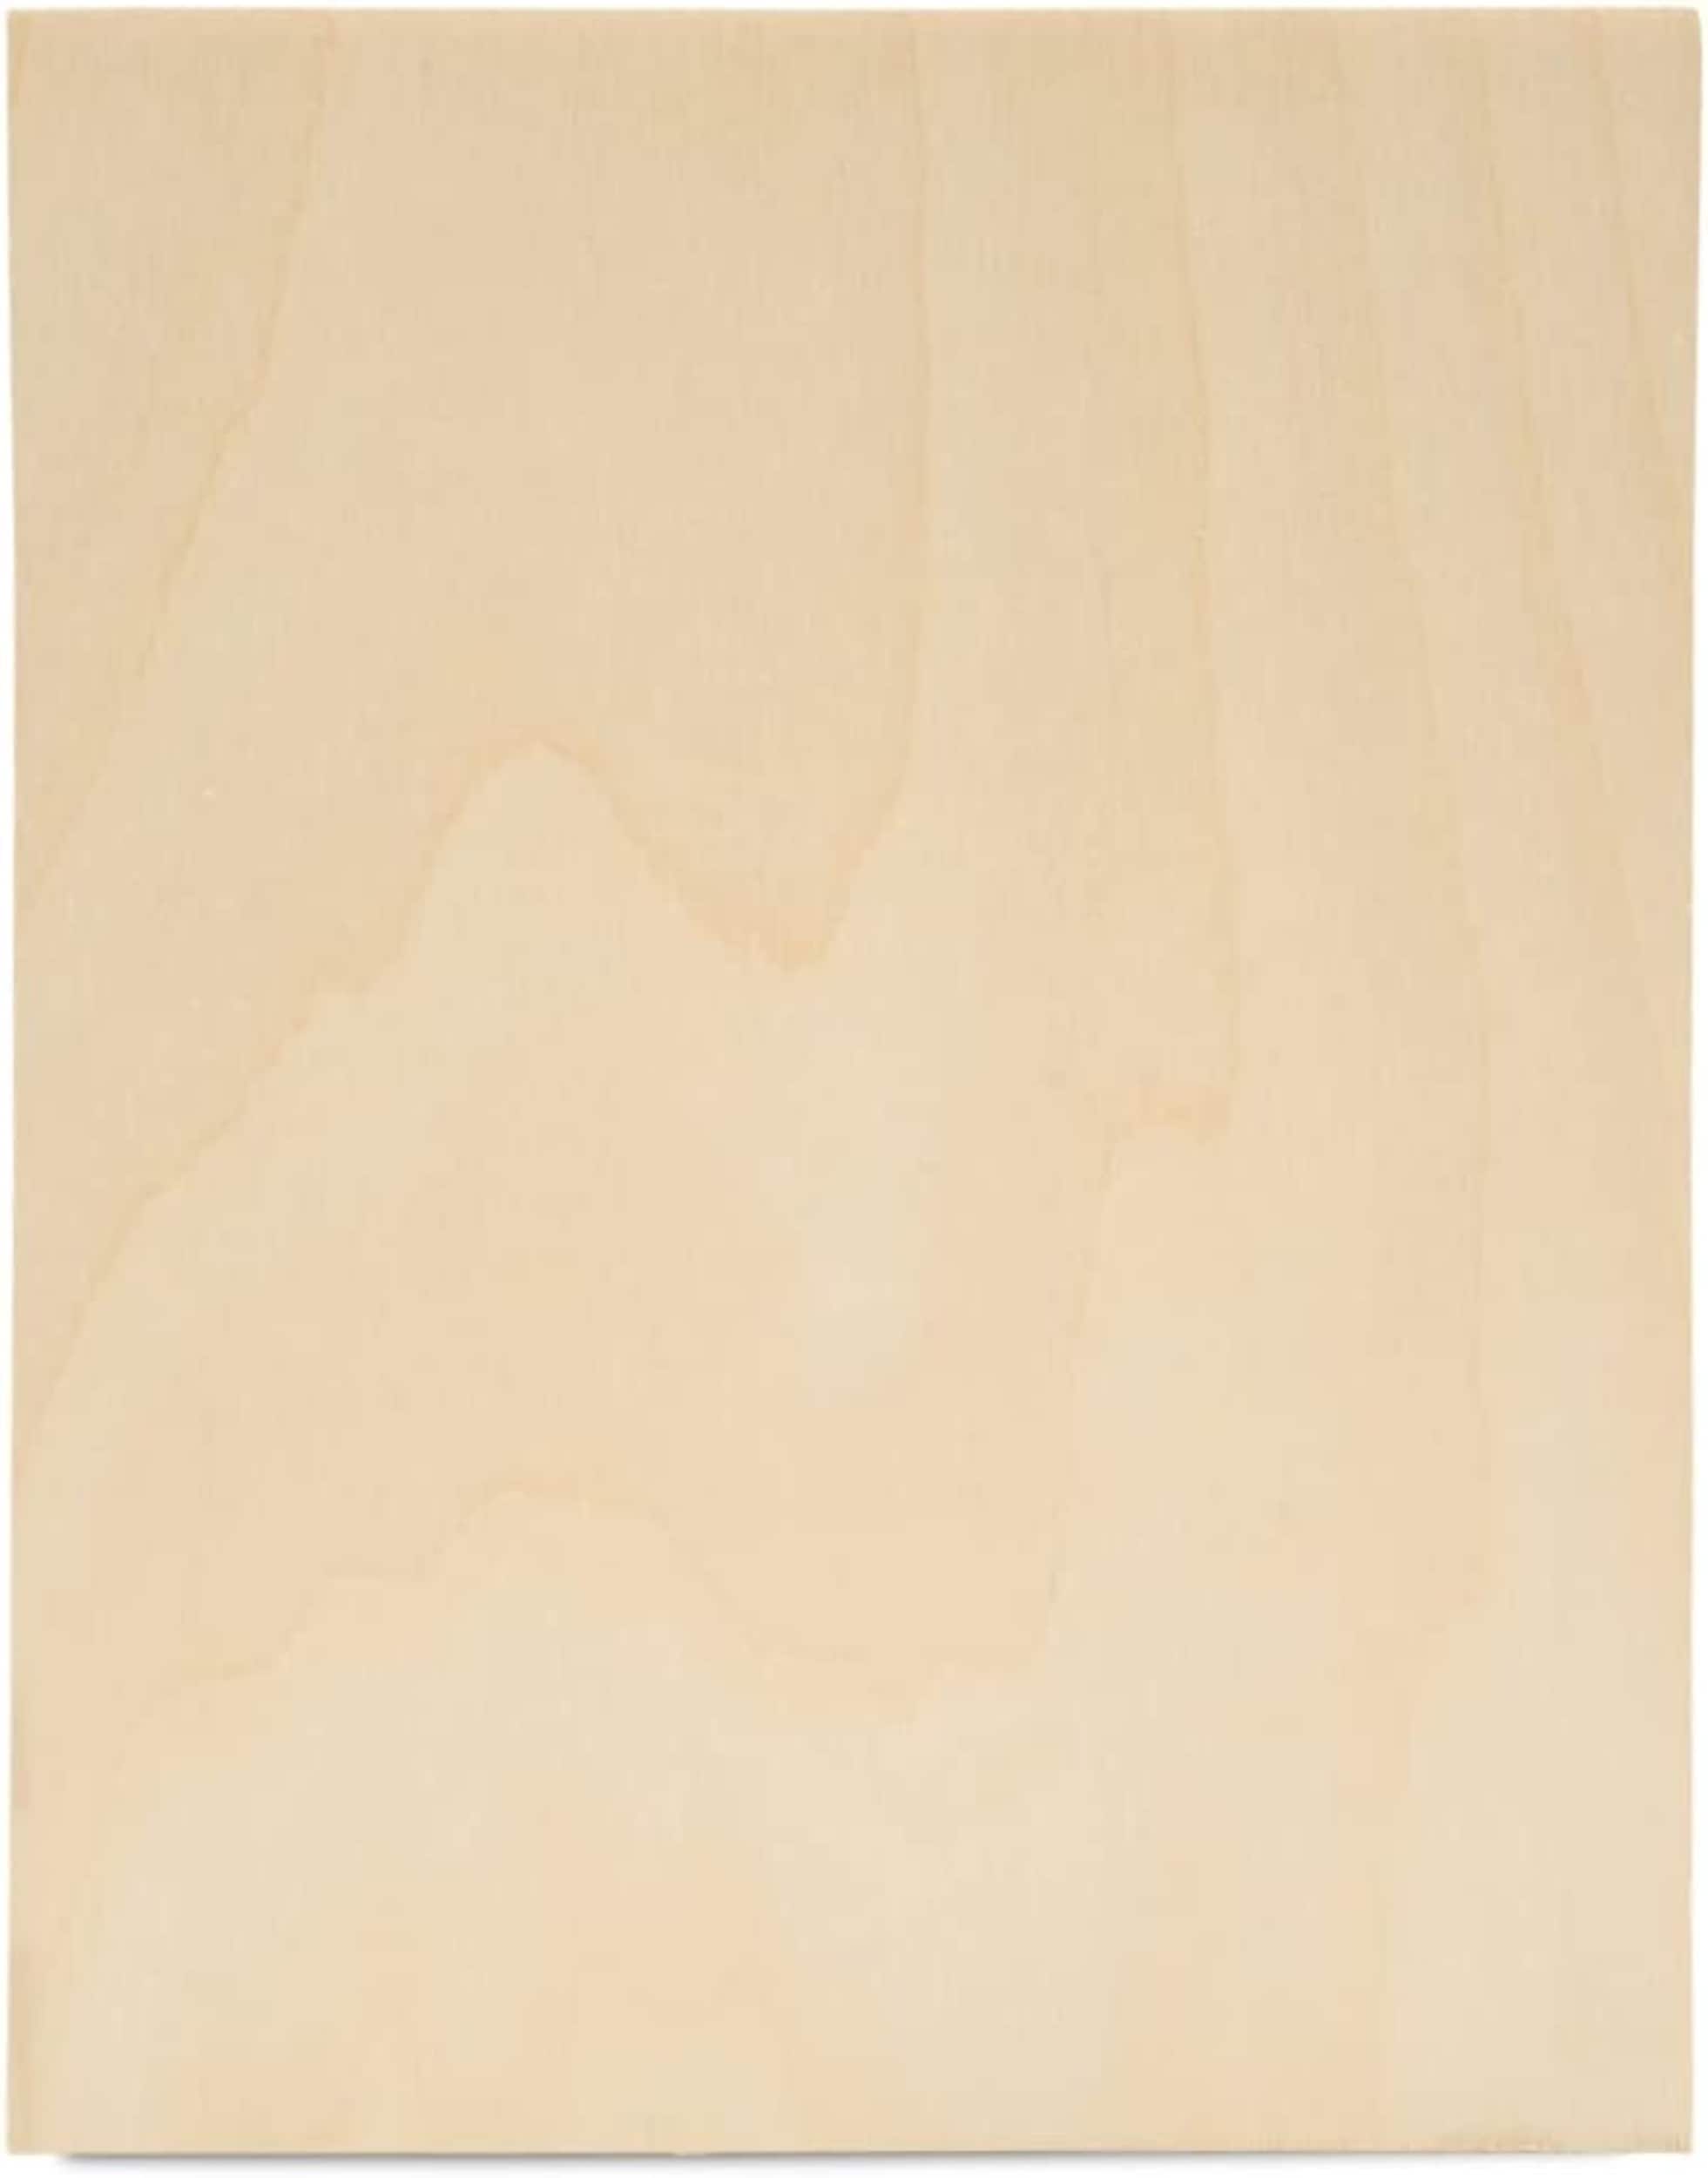 Baltic Birch Plywood, 3 mm 1/8 x 12 x 12 Inch Craft Wood, Box of 45 B/BB  Grade Baltic Birch Sheets, Perfect for Laser, CNC Cutting and Wood Burning